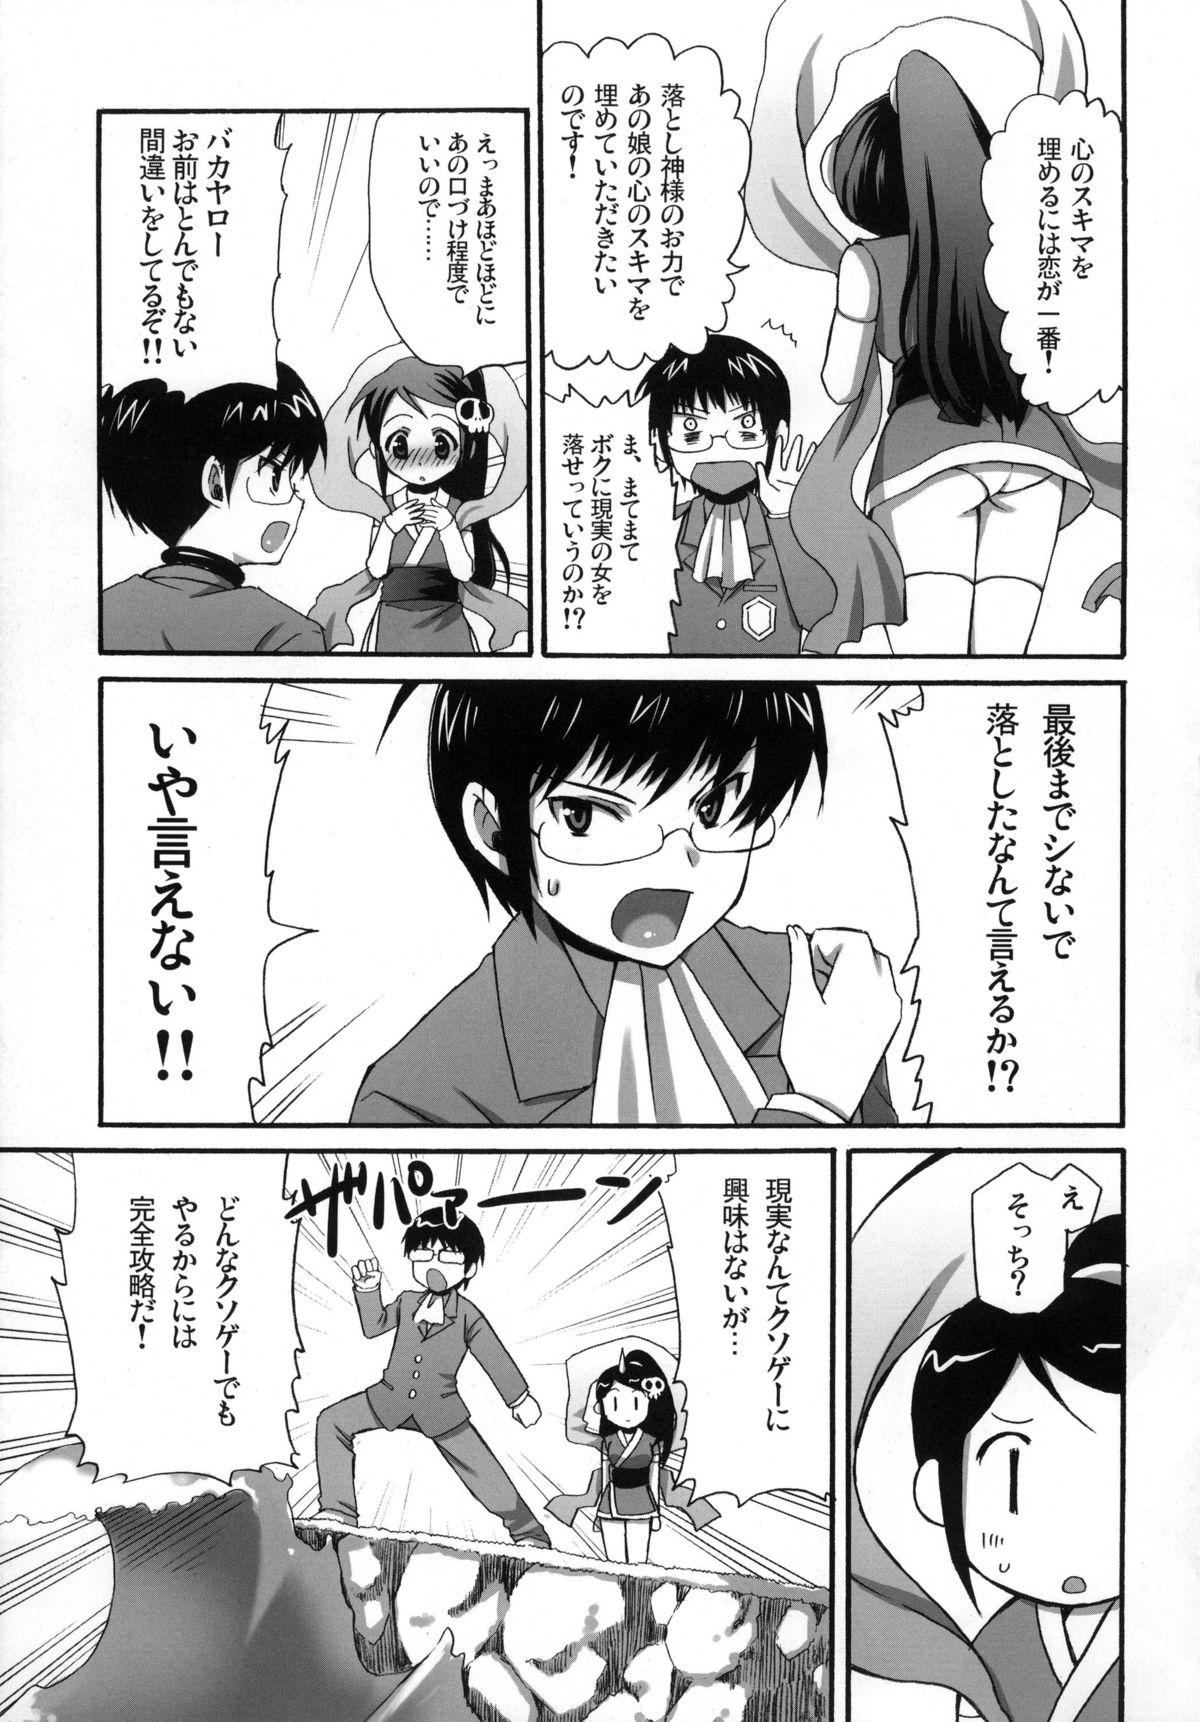 Spying Kami Nomi zo Fullcomp - The world god only knows Twinkstudios - Page 5